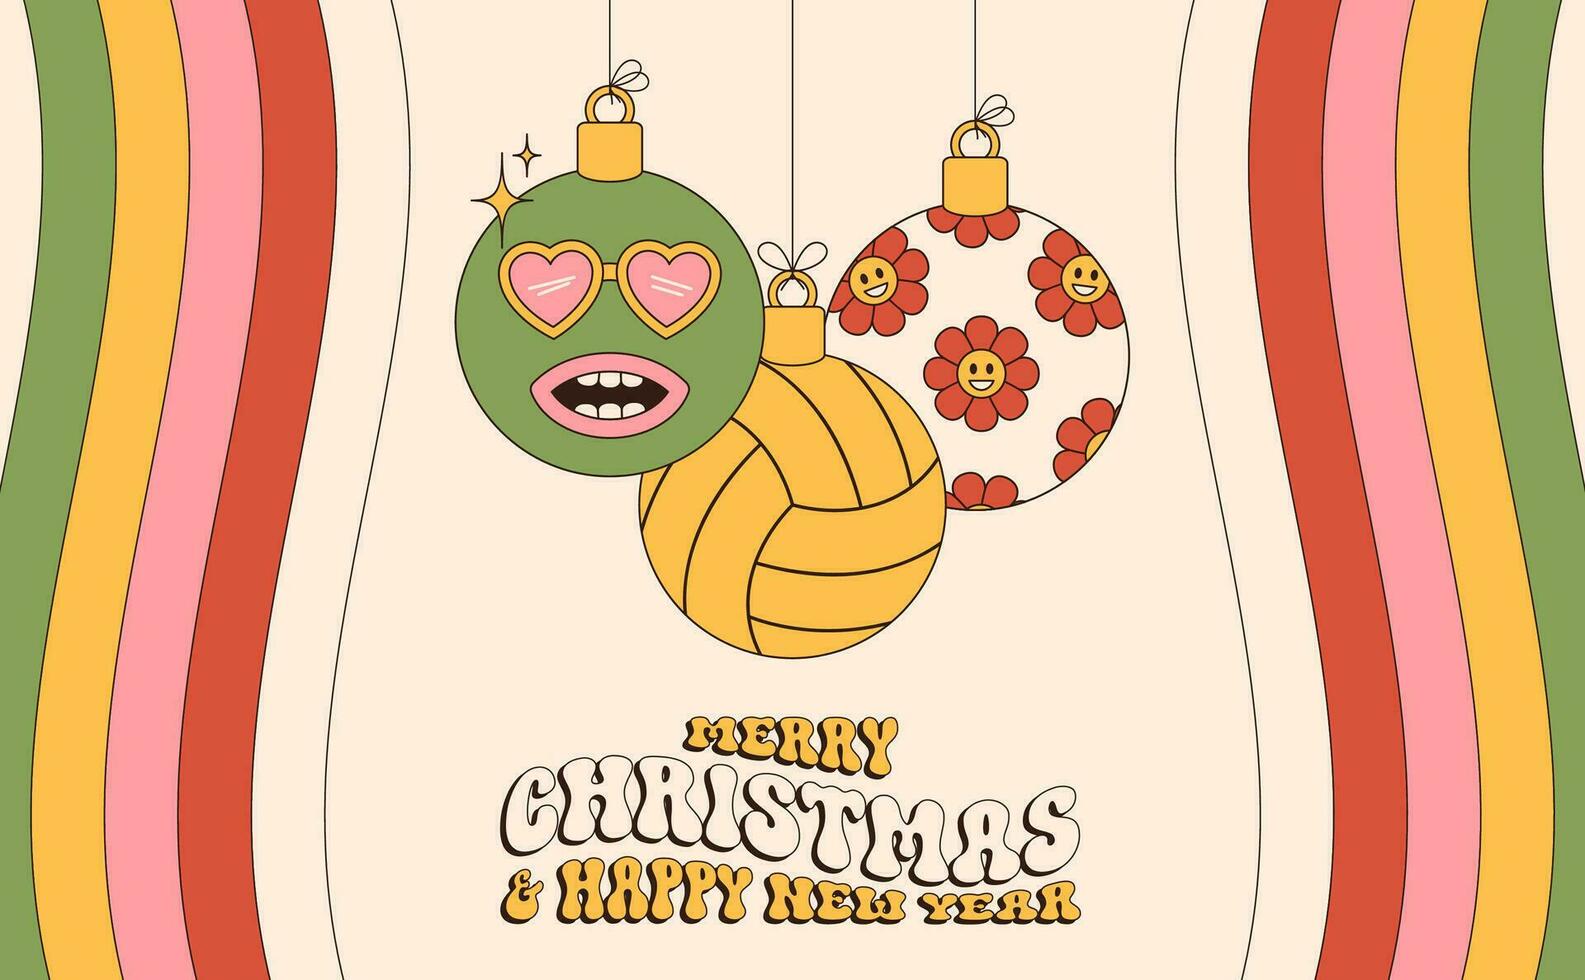 volleyball Merry Christmas and Happy New Year groovy Sports greeting card. Hanging ball as a groovy Christmas ball on vibrant background. Vector illustration.